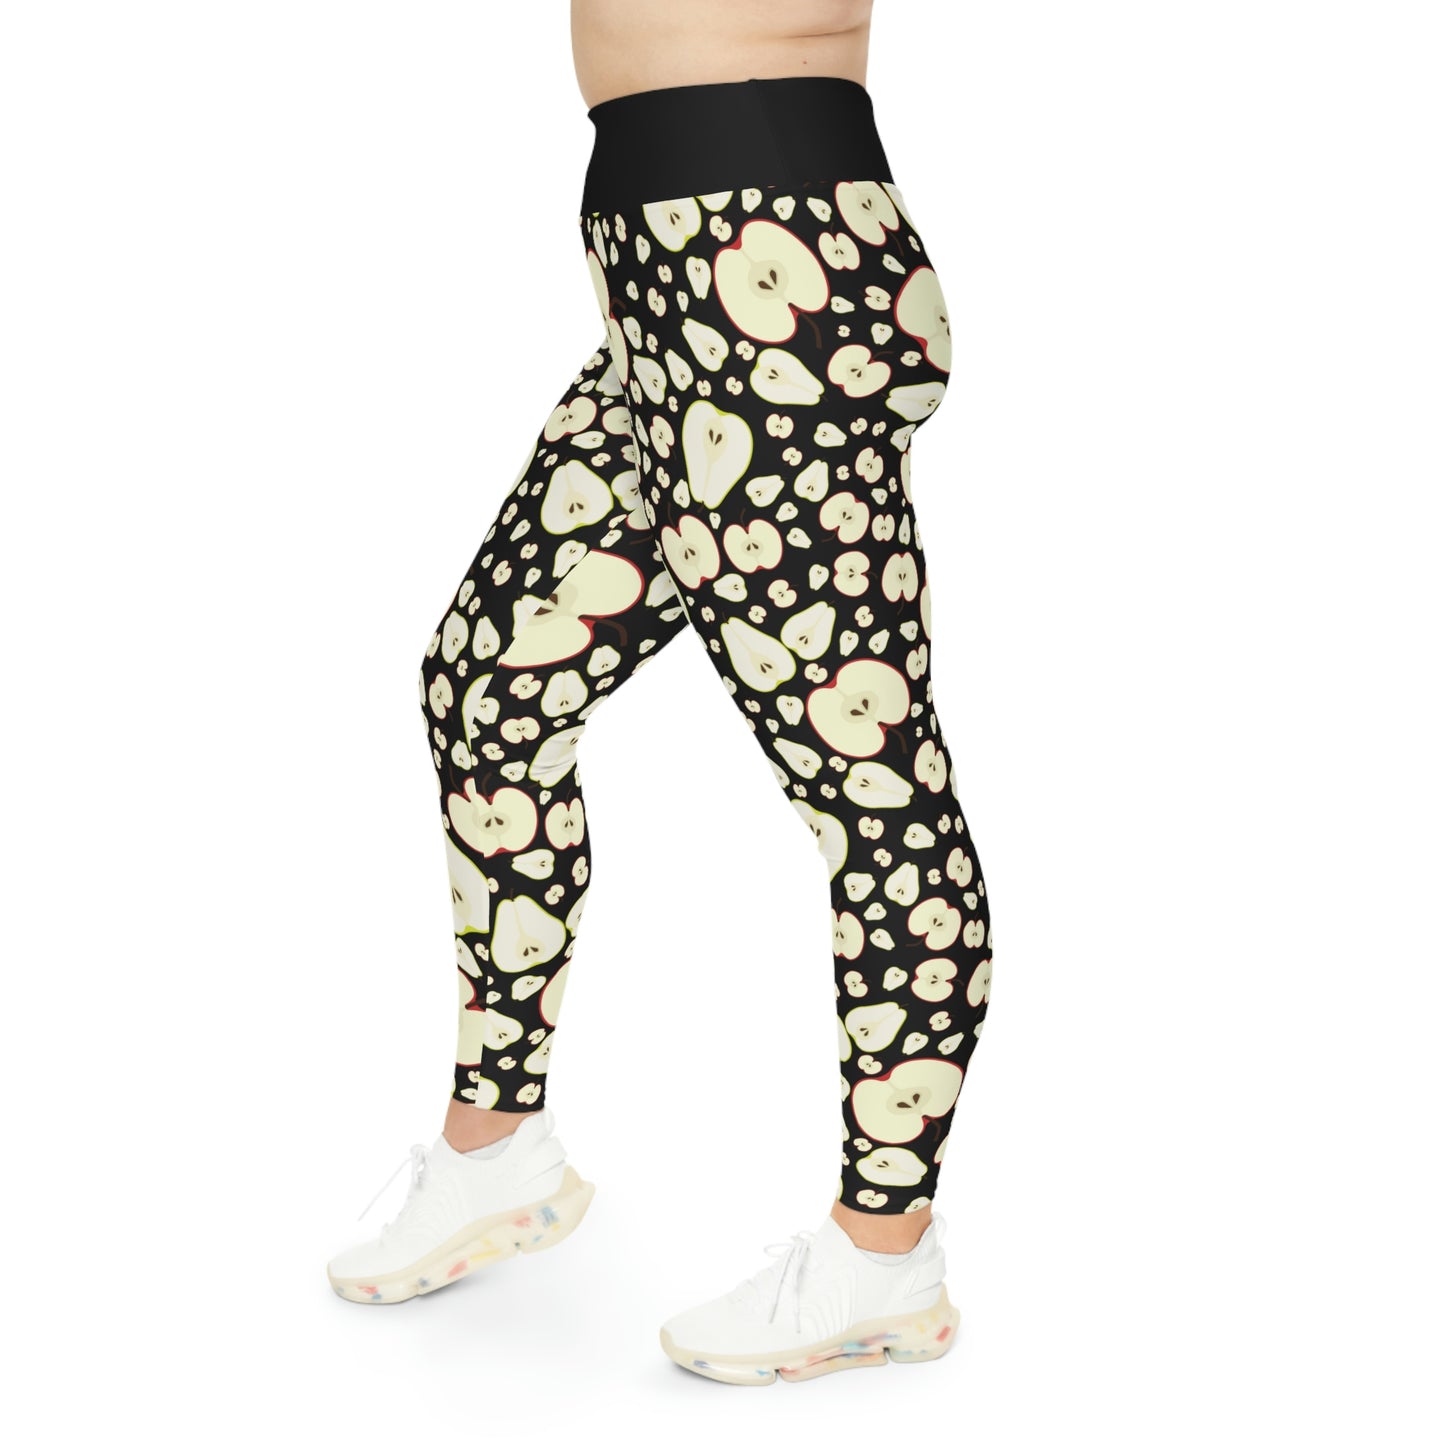 Apples Plus Size Leggings One of a Kind Gift - Unique Workout Activewear tights for Mom fitness, Mothers Day, Girlfriend Christmas Gift